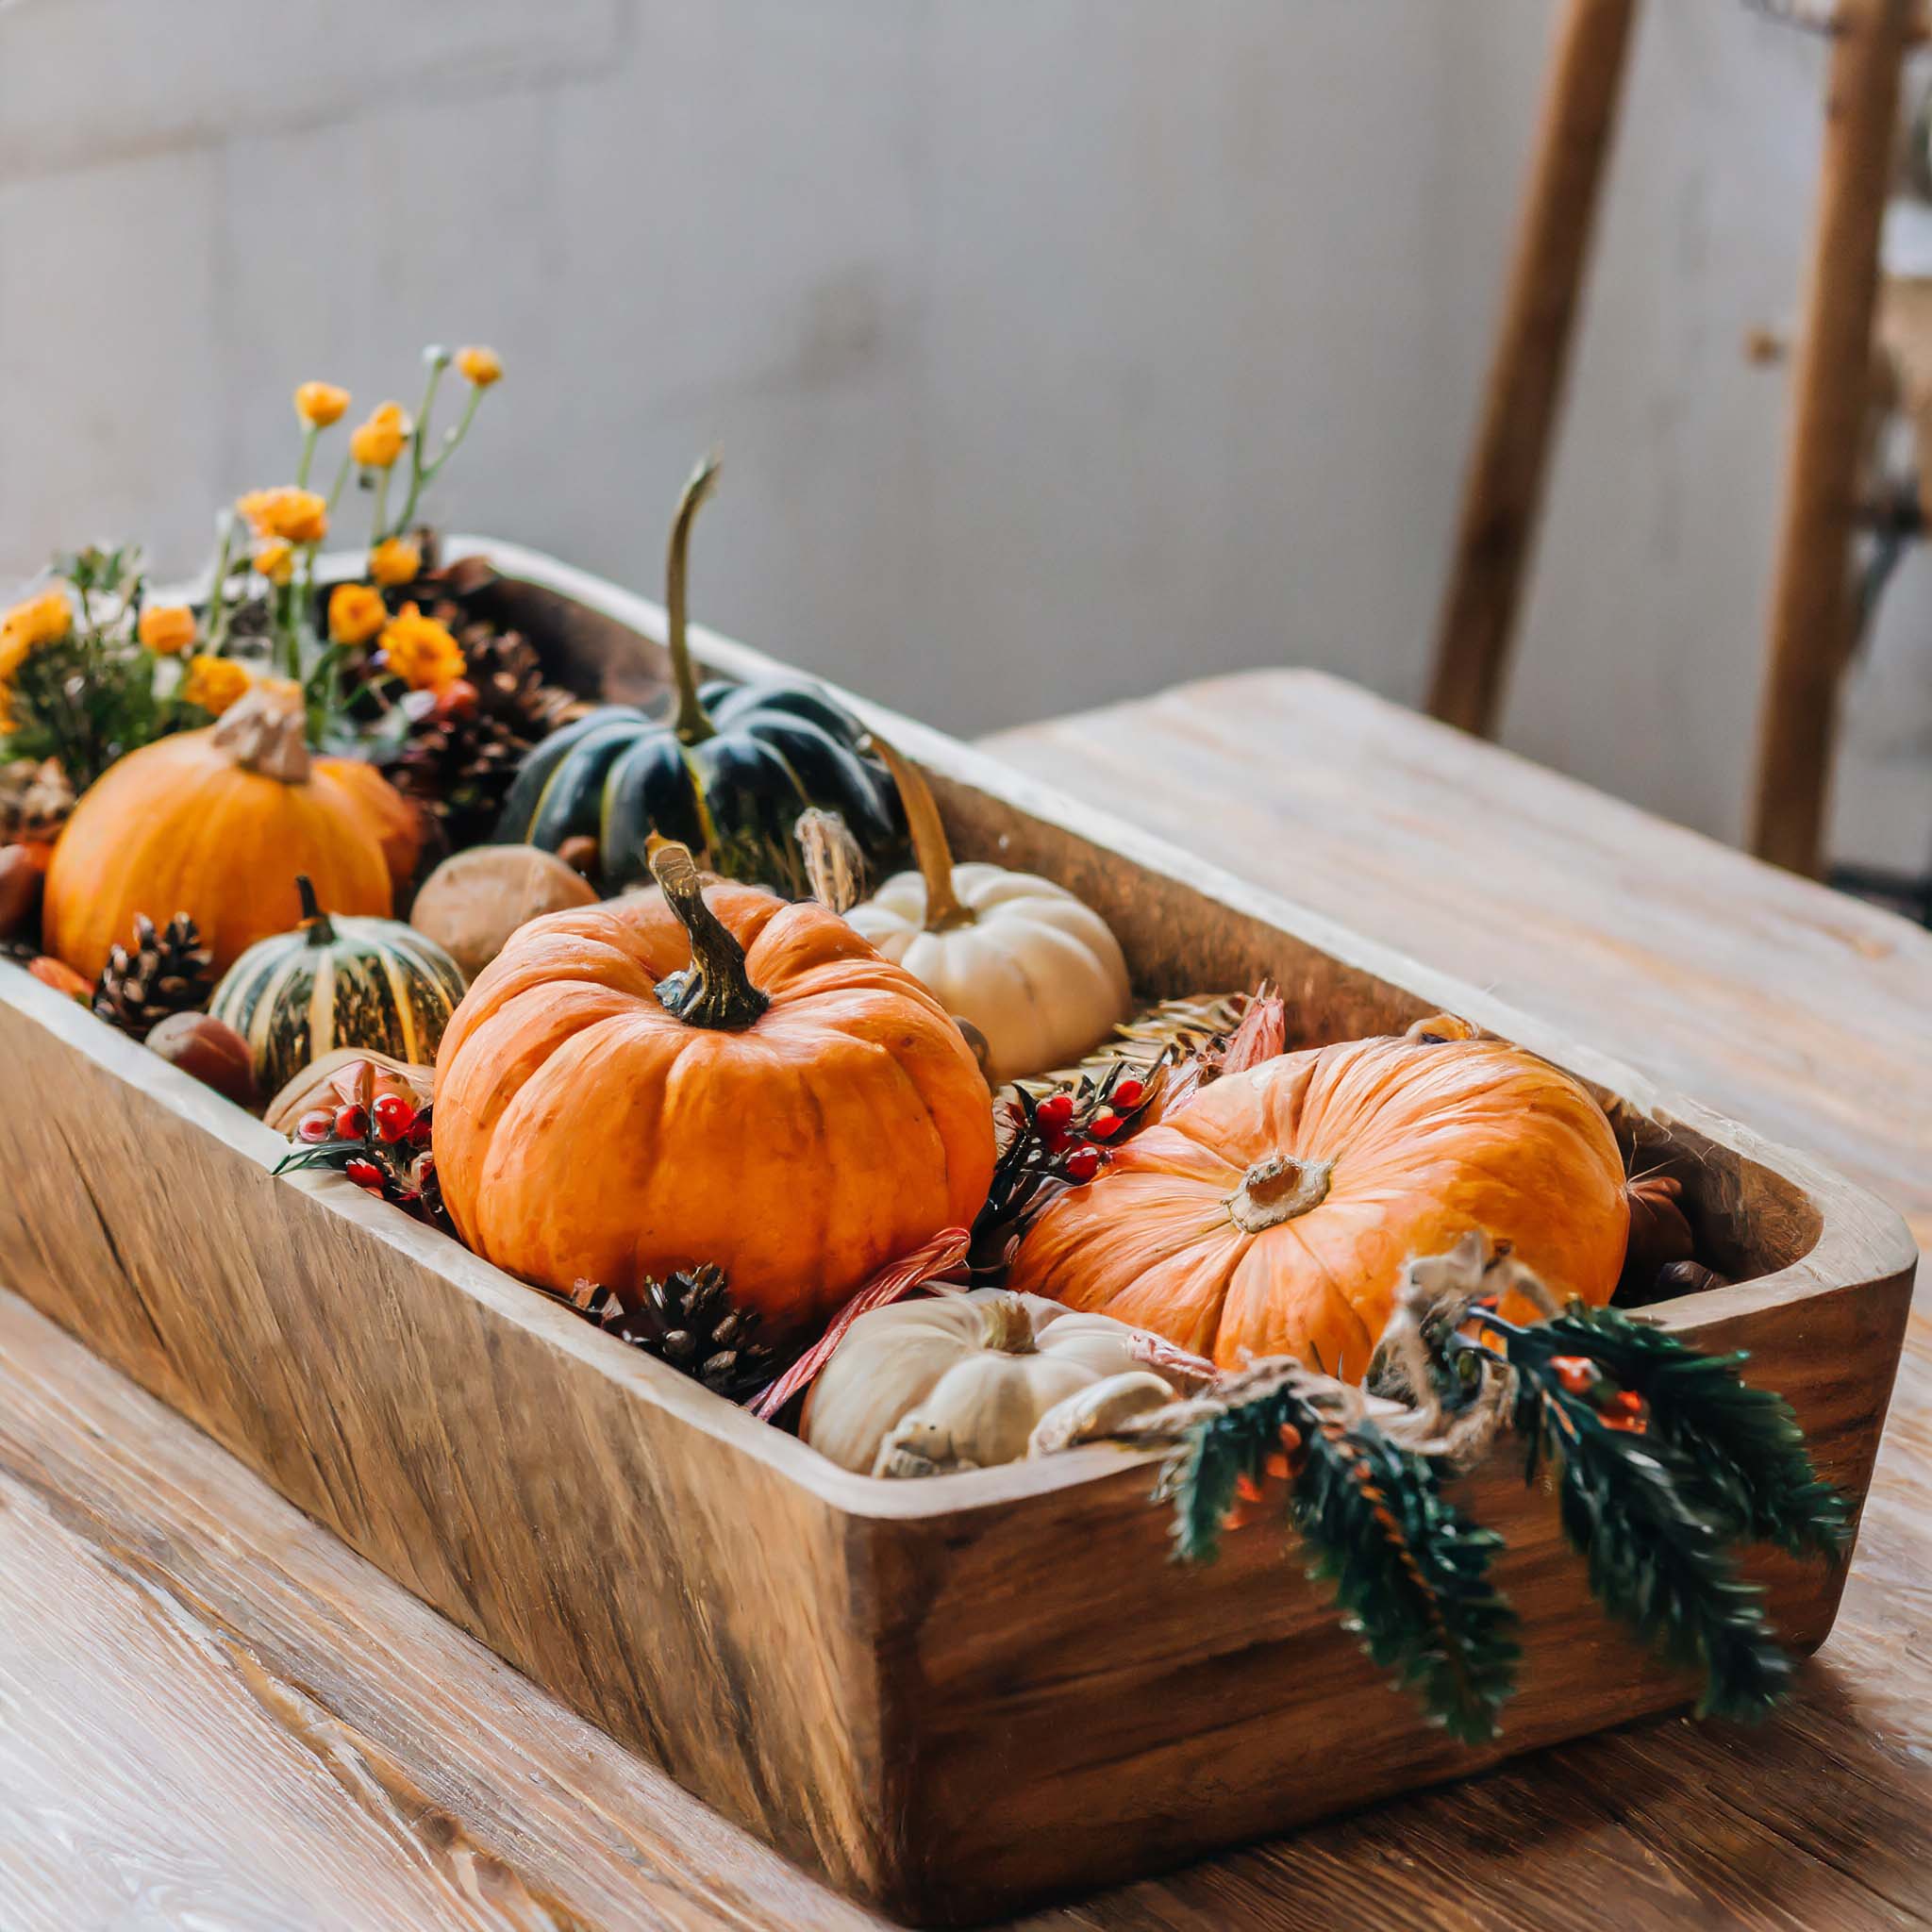 Wooden dough bowl filled with artisanal pumpkins, pinecones, flowers, and holly.